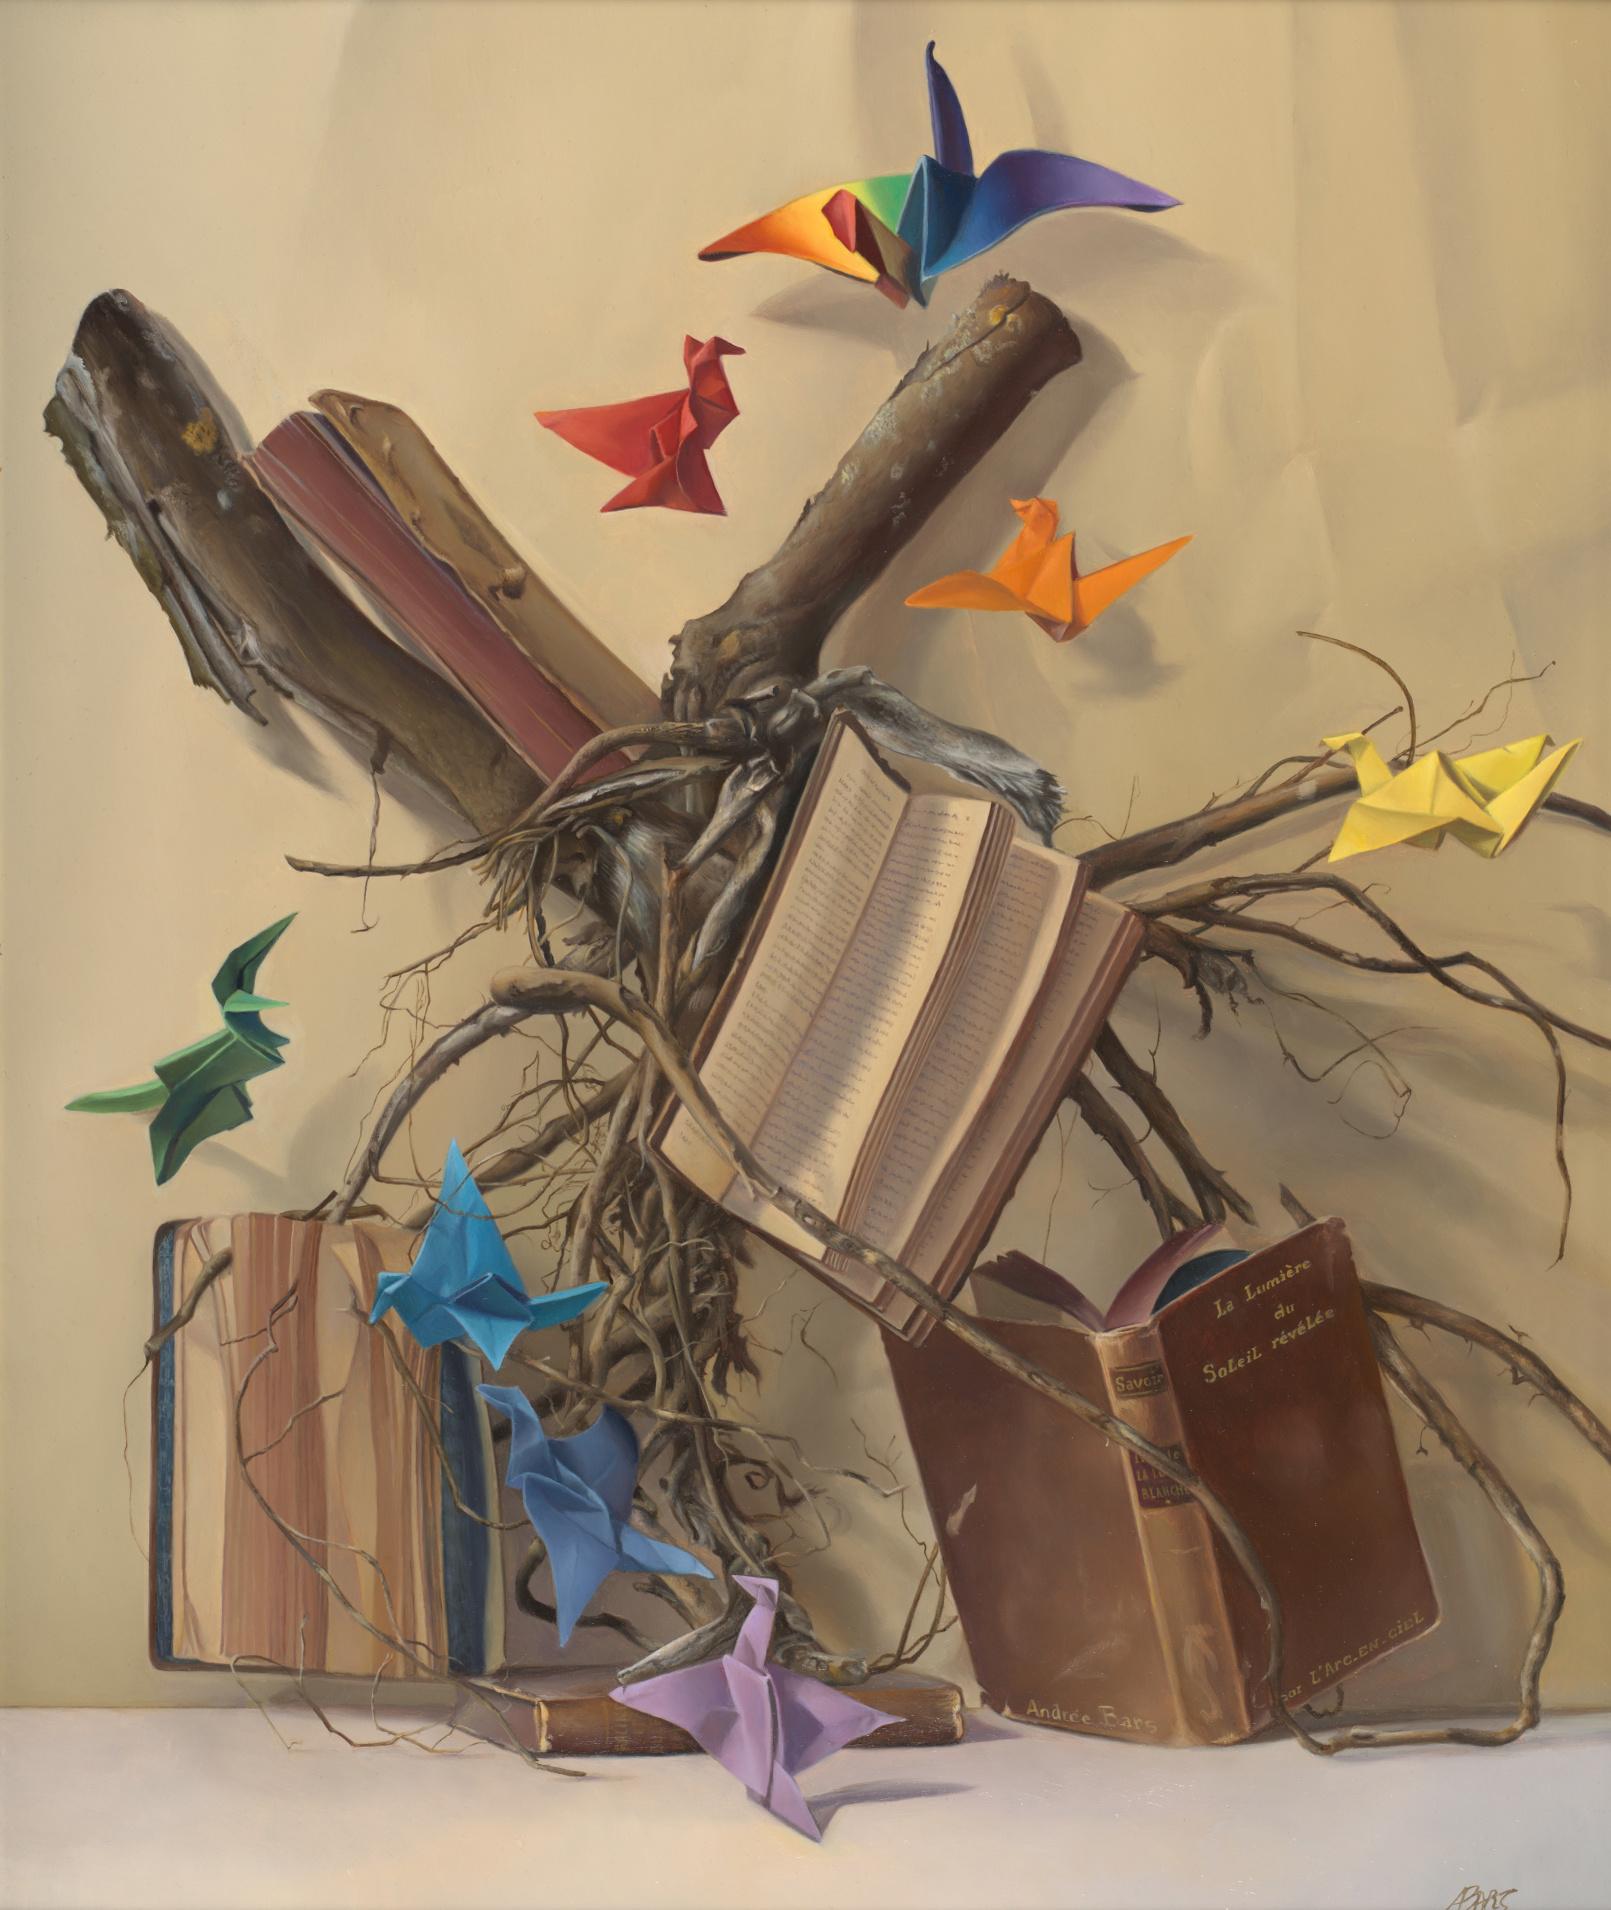 Andrée Bars Still-Life Painting - “Knowledge Root”, with Rainbow Colors Origami Cranes, Symbolism Oil Painting